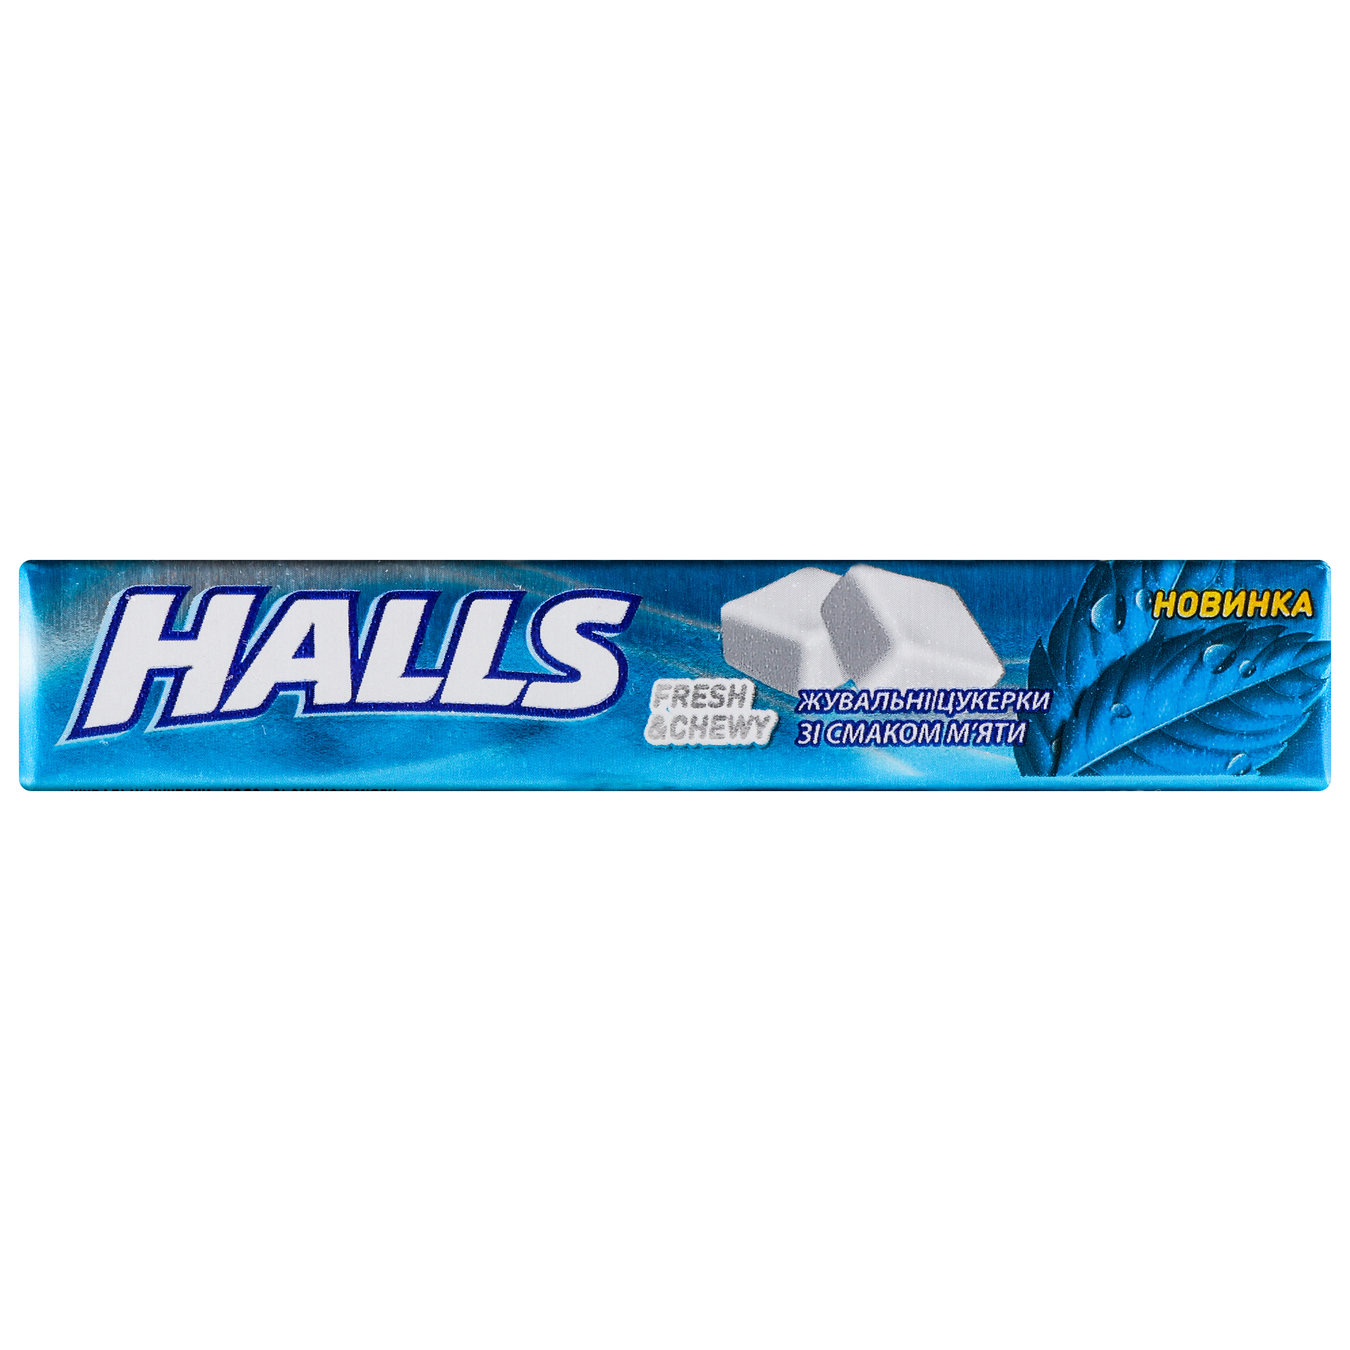 Halls chewing candies with mint flavor 47g